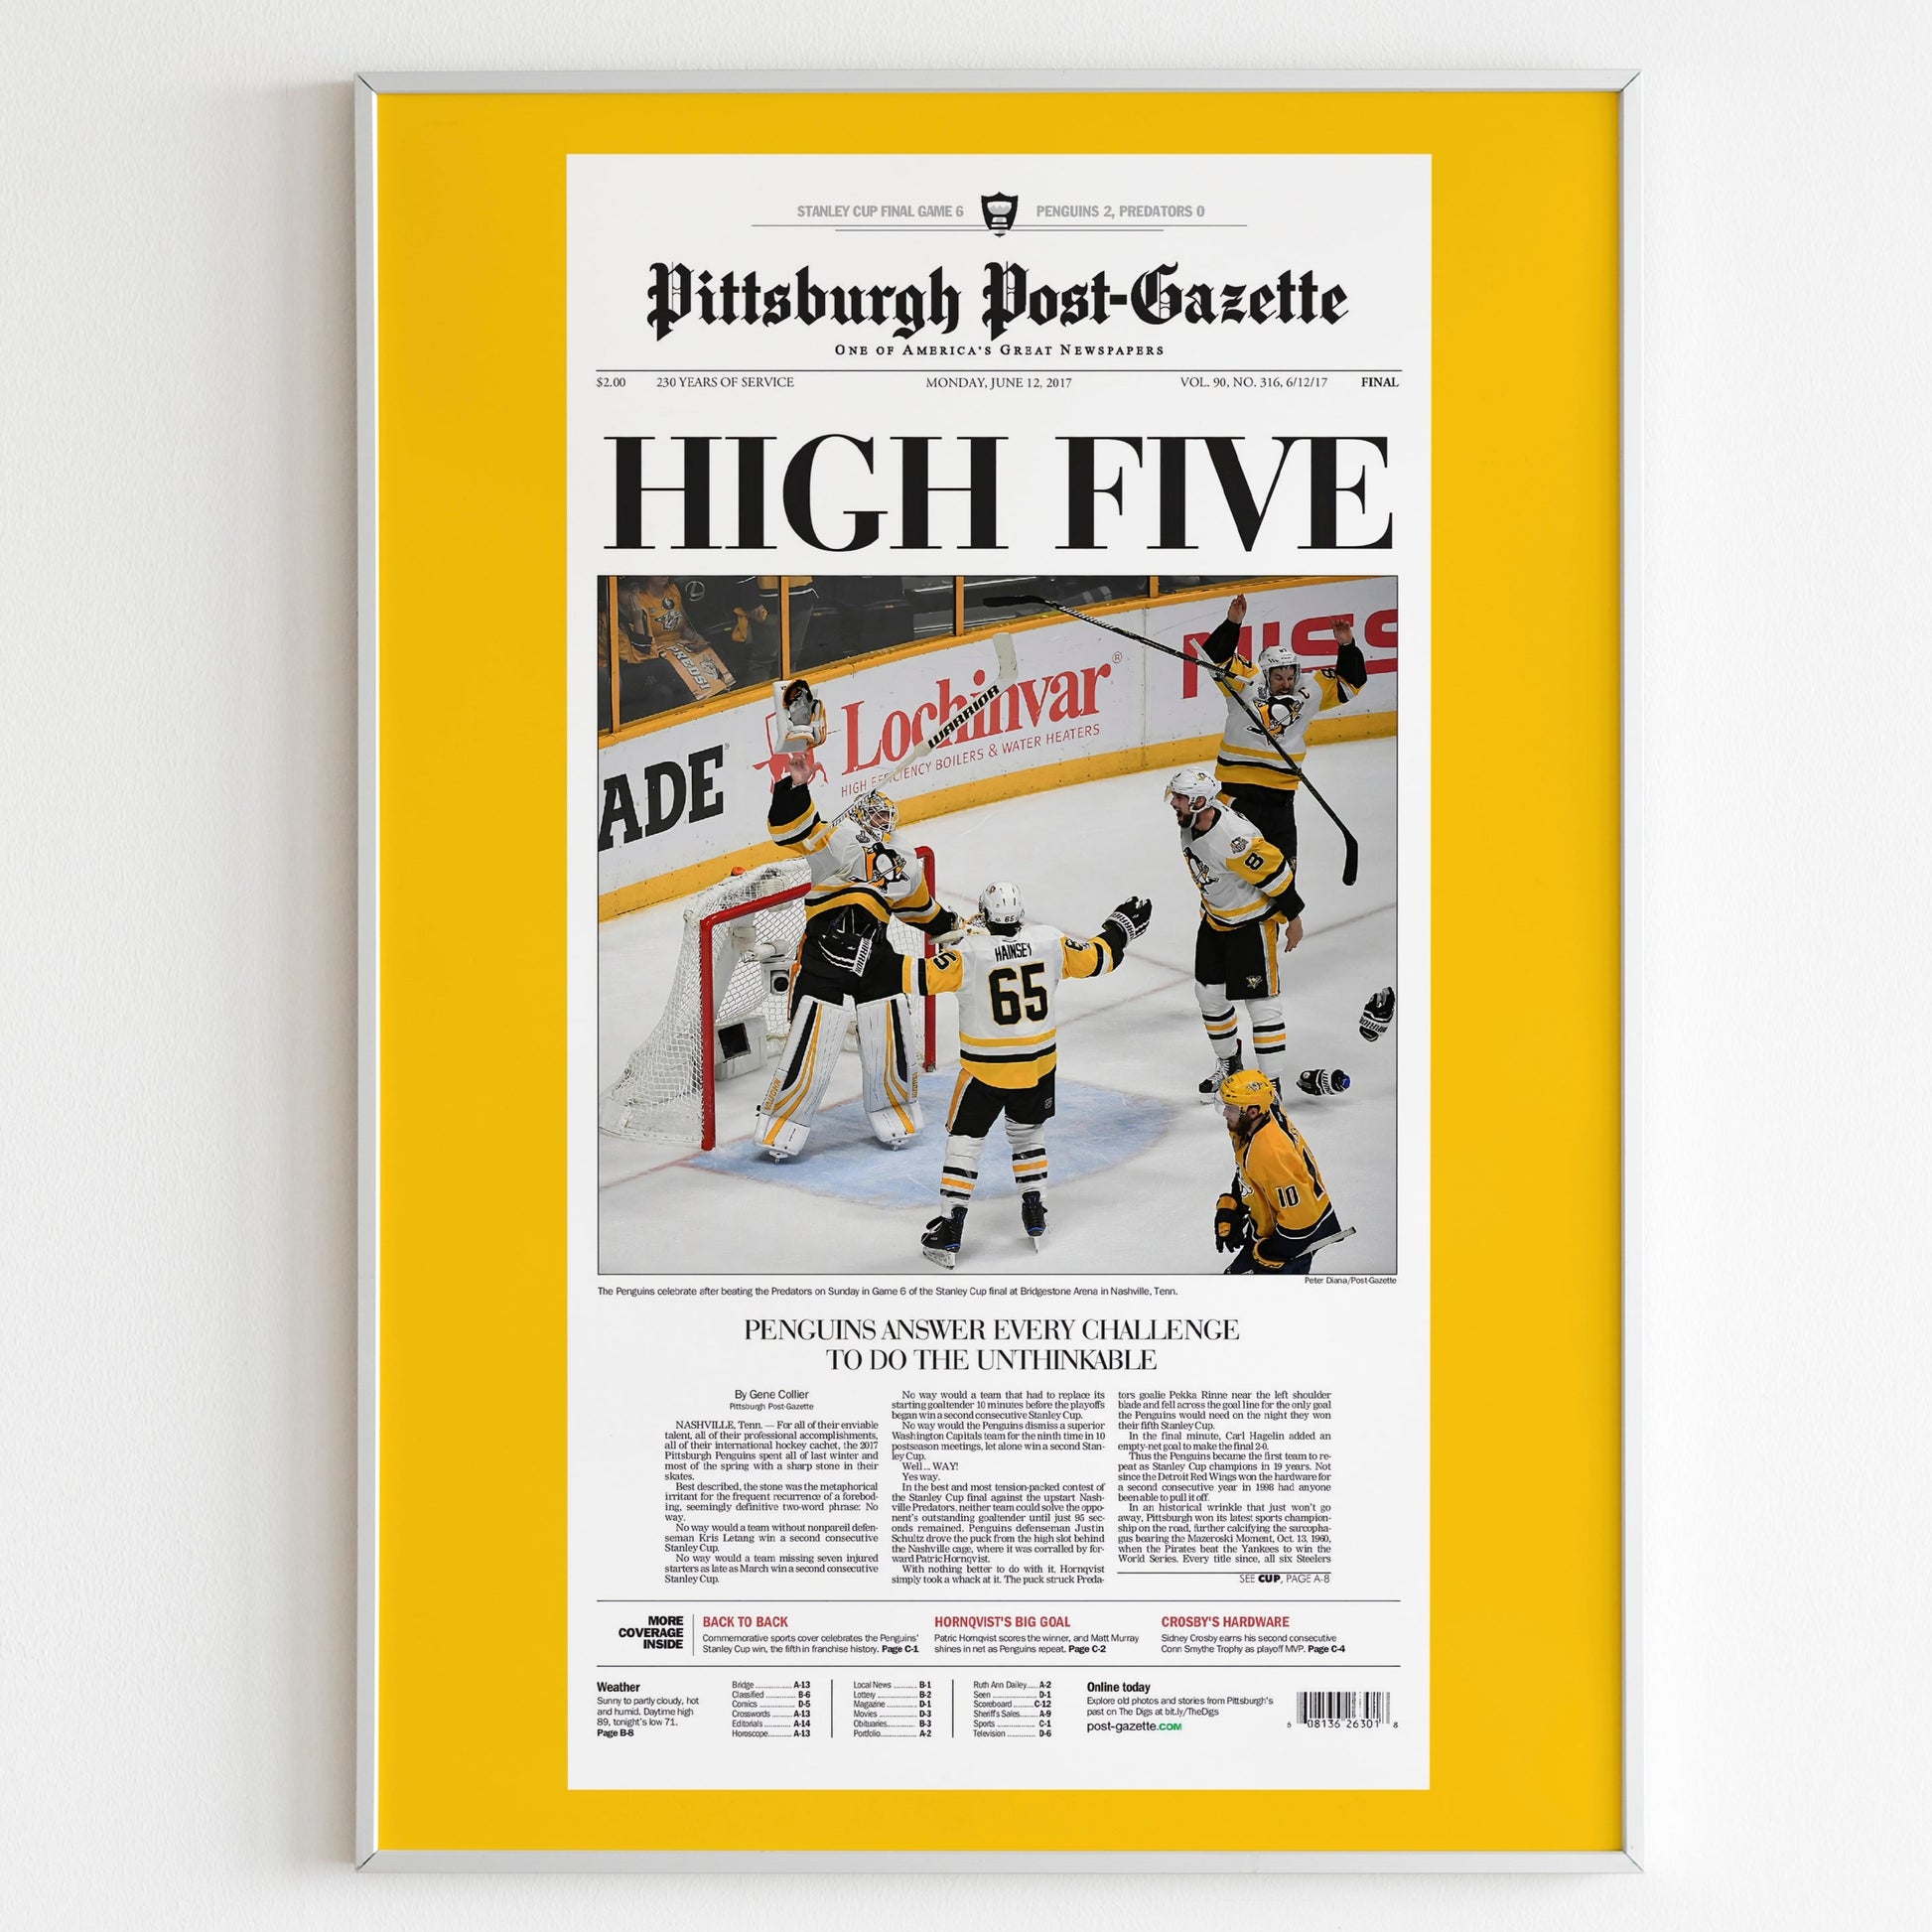 Pittsburgh Penguins 2017 NHL Stanley Cup Champions Front Cover Pittsburgh Post-Gazette Poster, Hockey Team Magazine, Newspaper Front Page